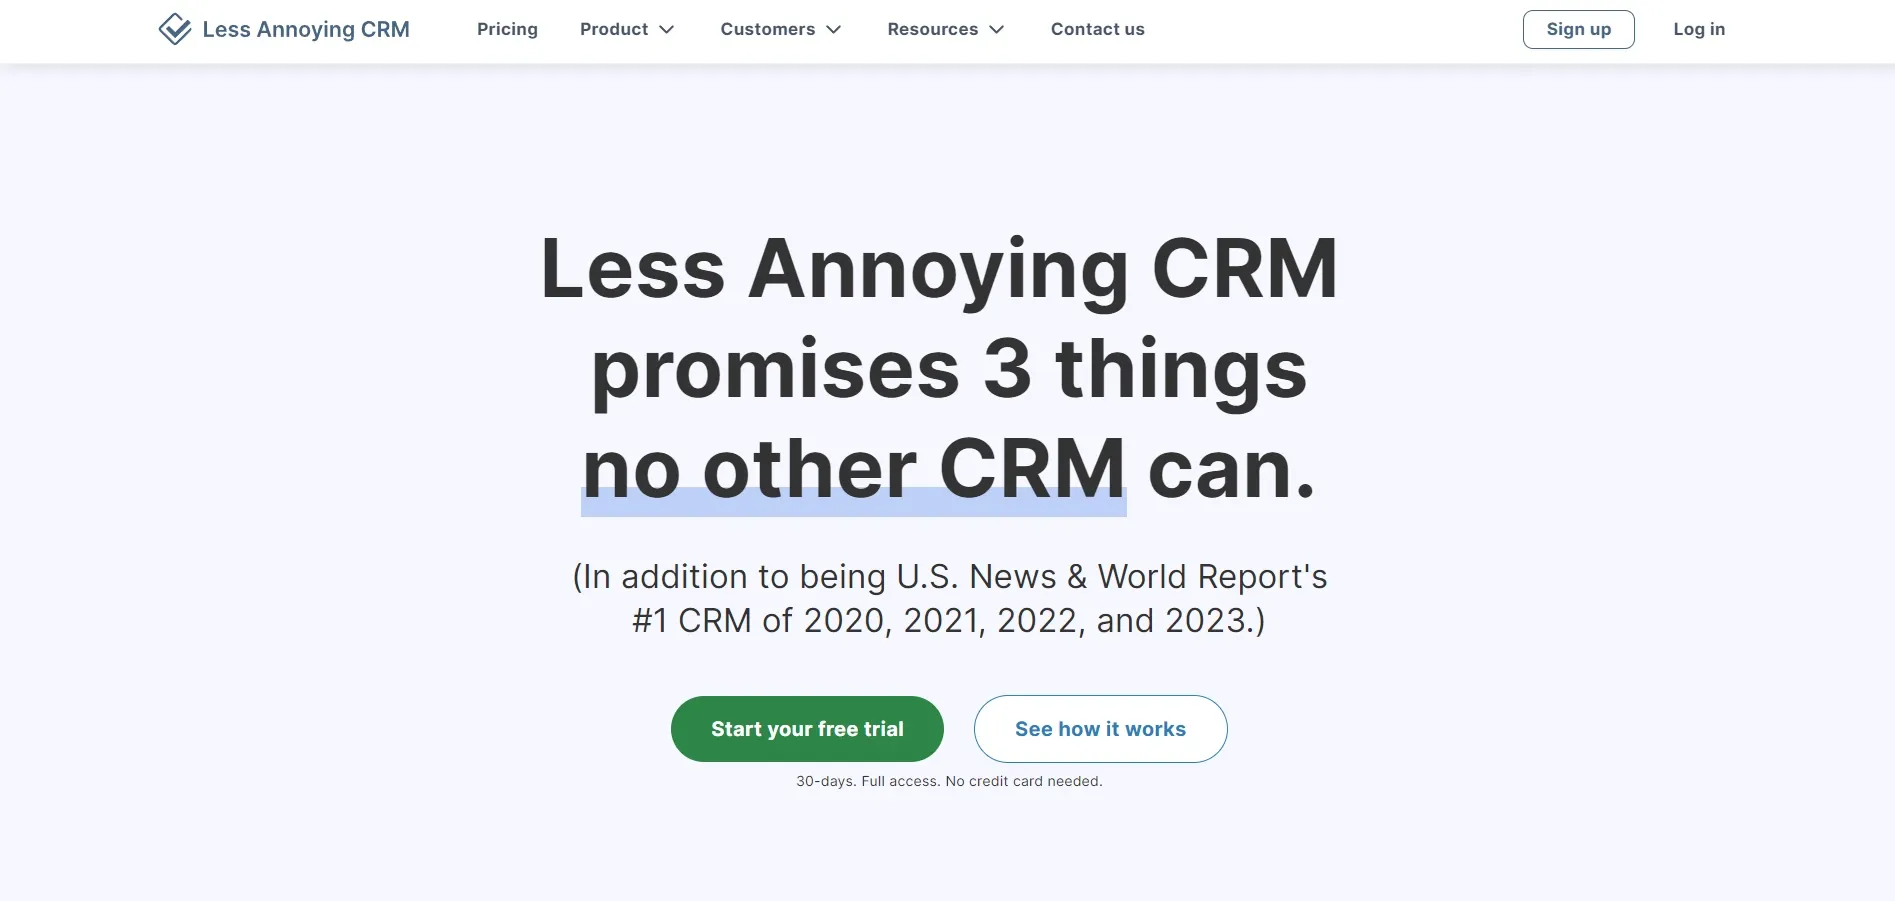 What is a Less Annoying CRM?